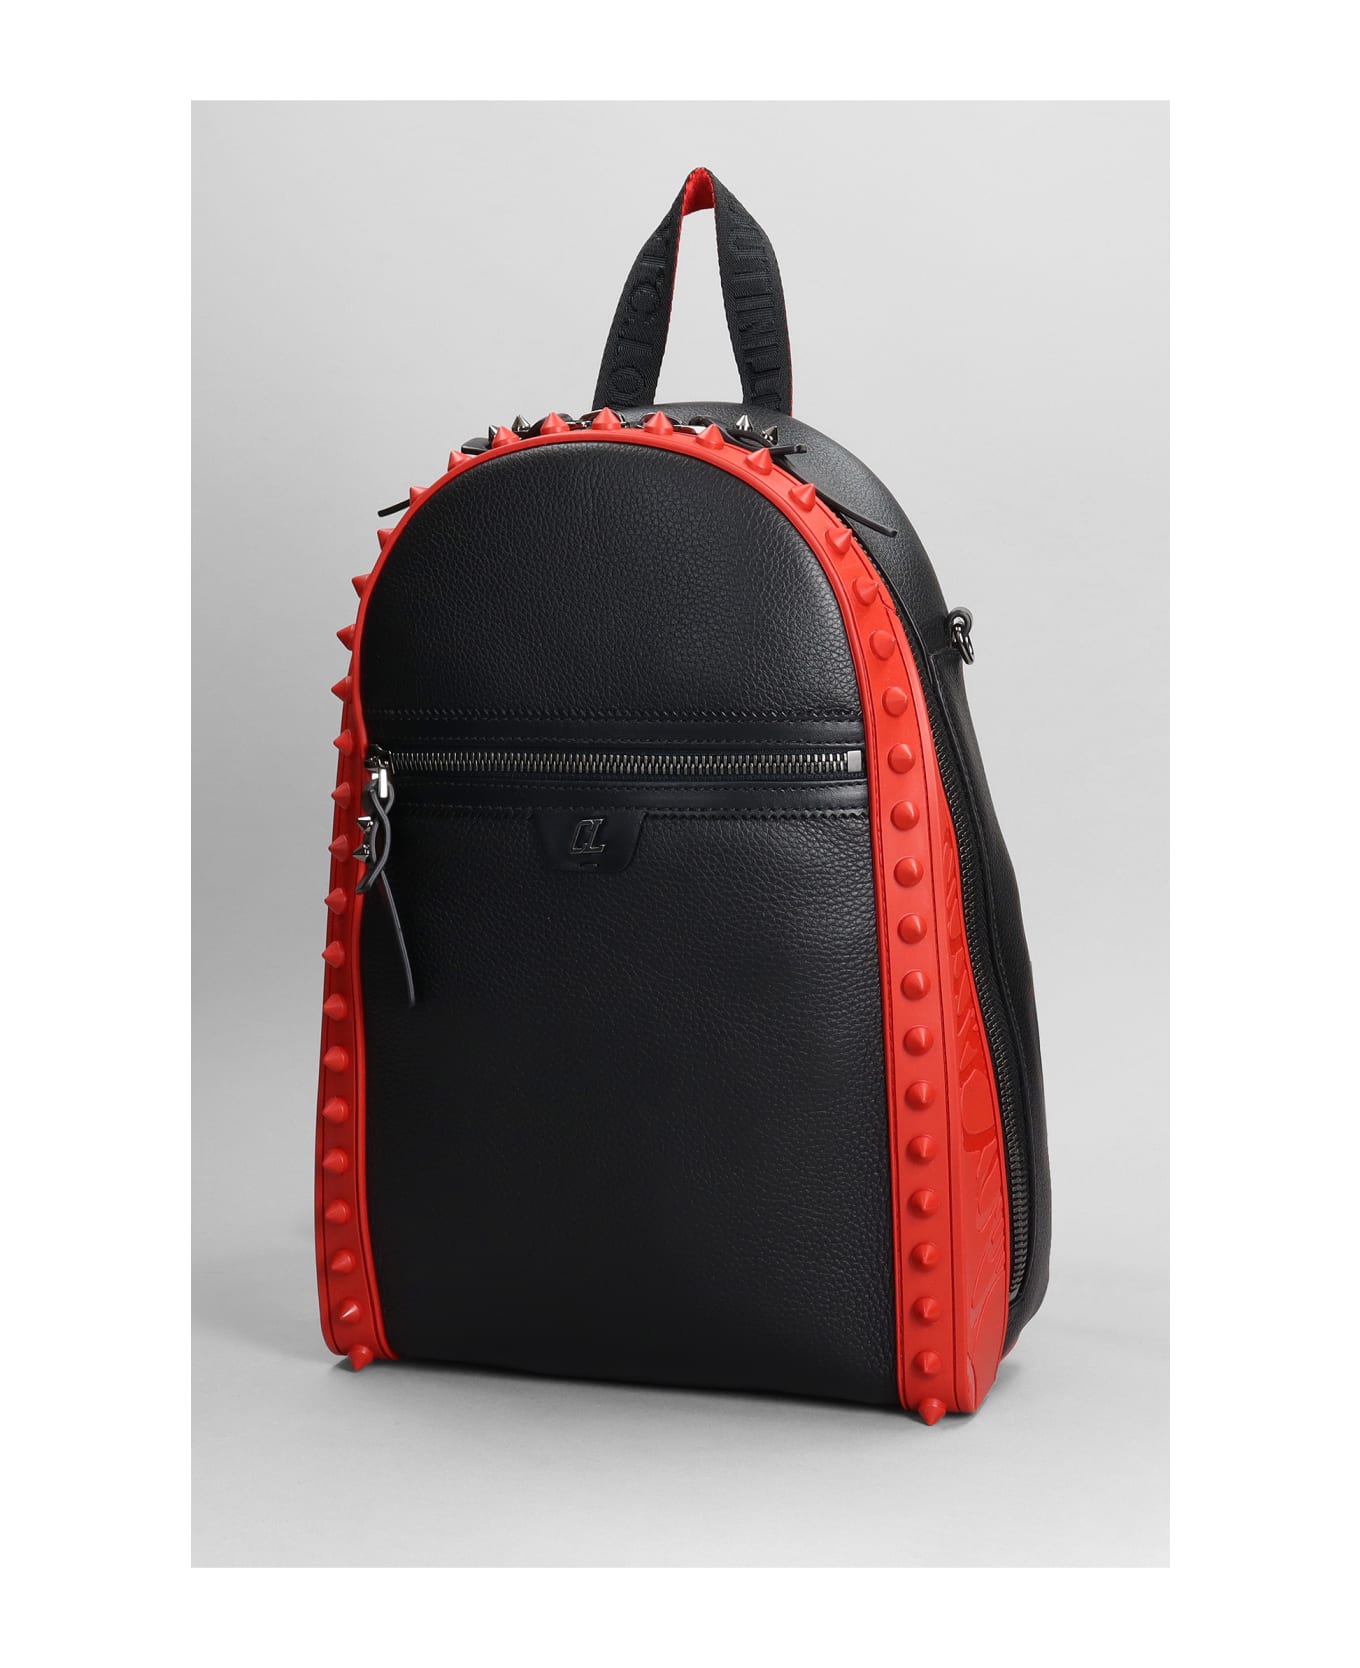 Christian Louboutin Backpack In Black Leather - black